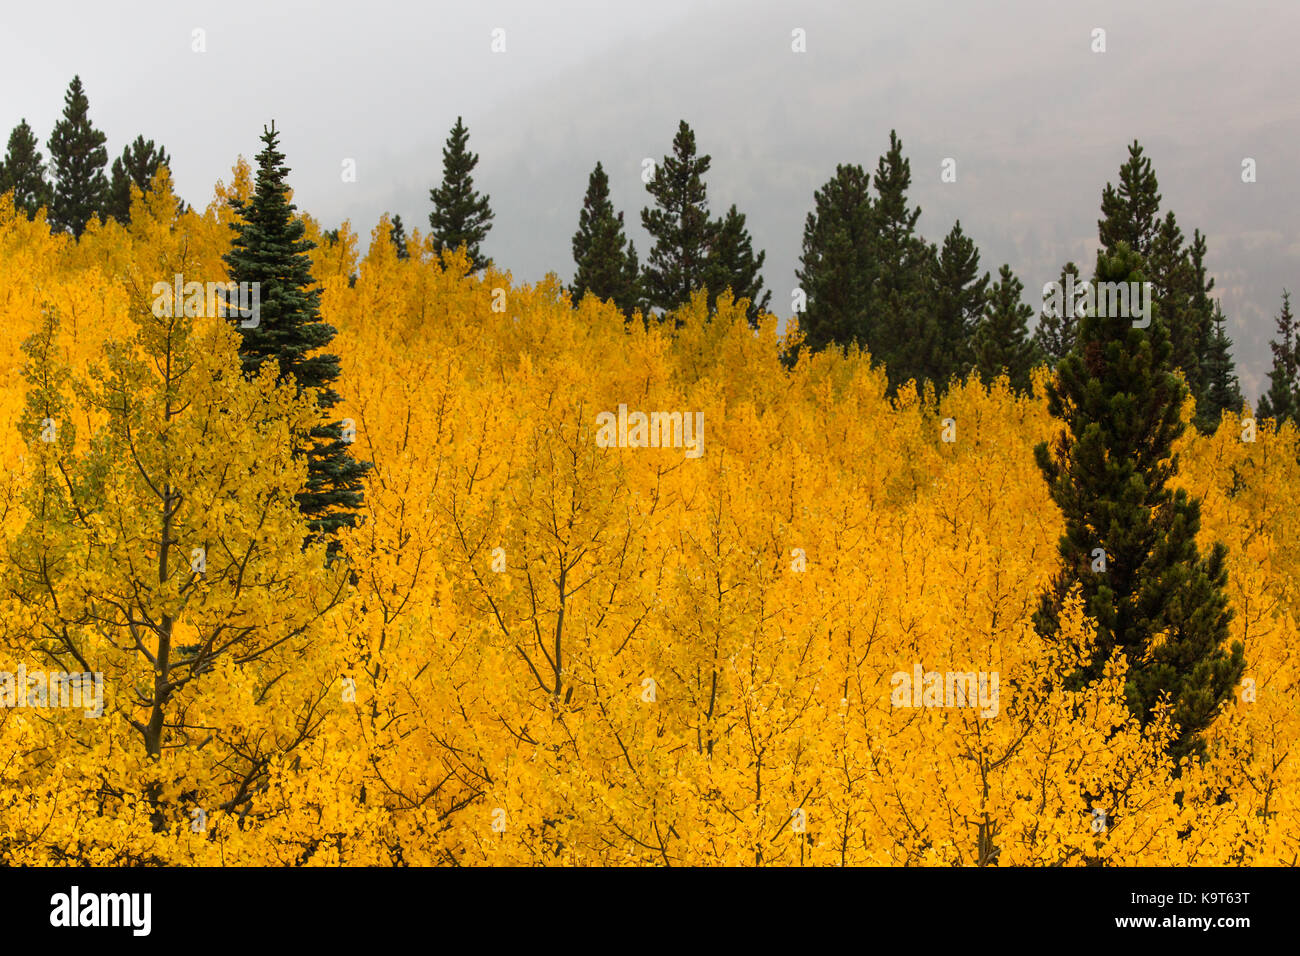 A grove of aspen trees with brilliant golden fall color and a few green conifer trees sprinkled through out with creeping fog in the background. Stock Photo